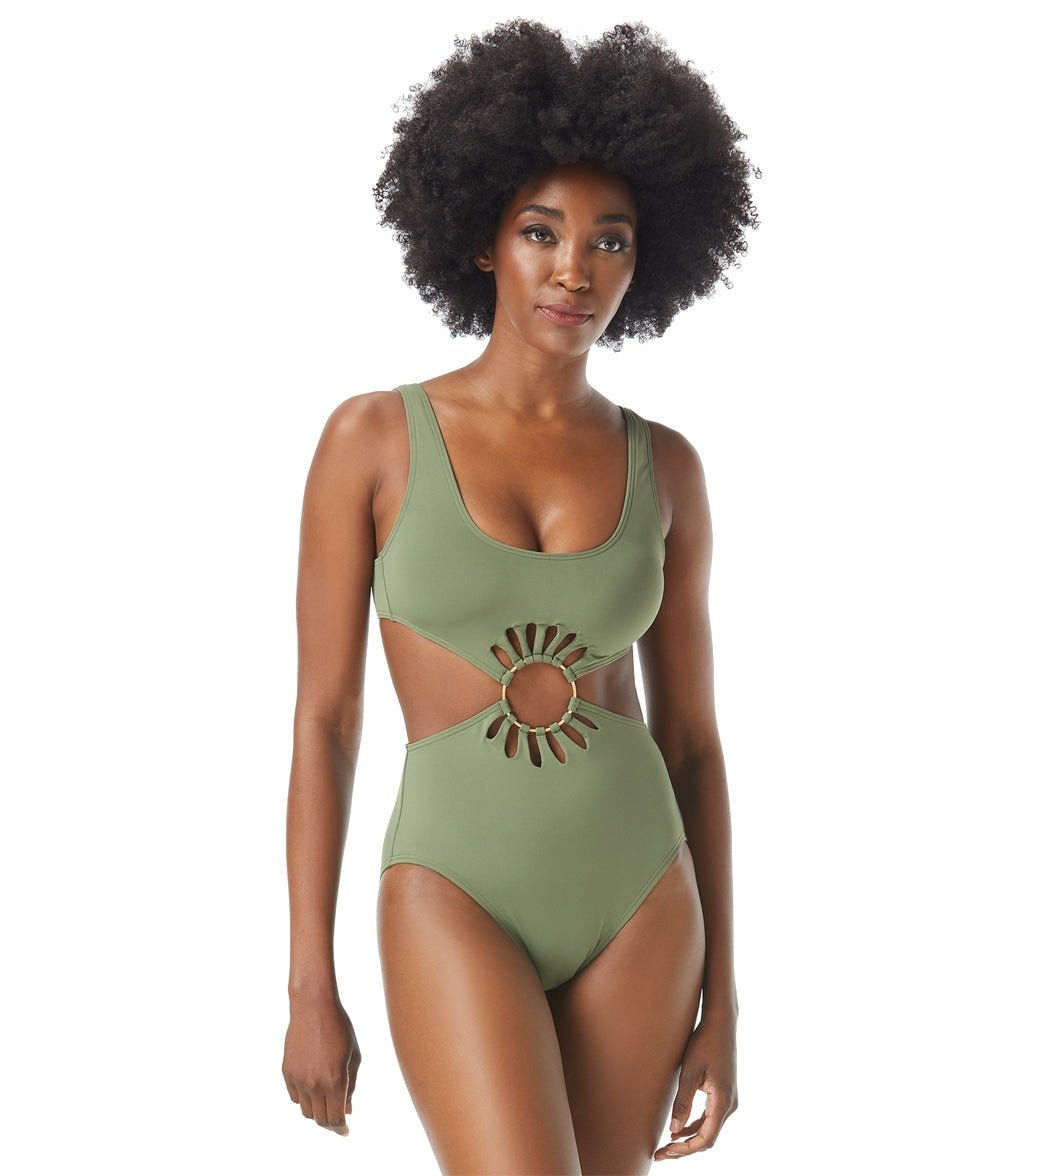 Vince Camuto Women's Tanzania Cheetah Belted Plunge V Neck One Piece  Swimsuit at